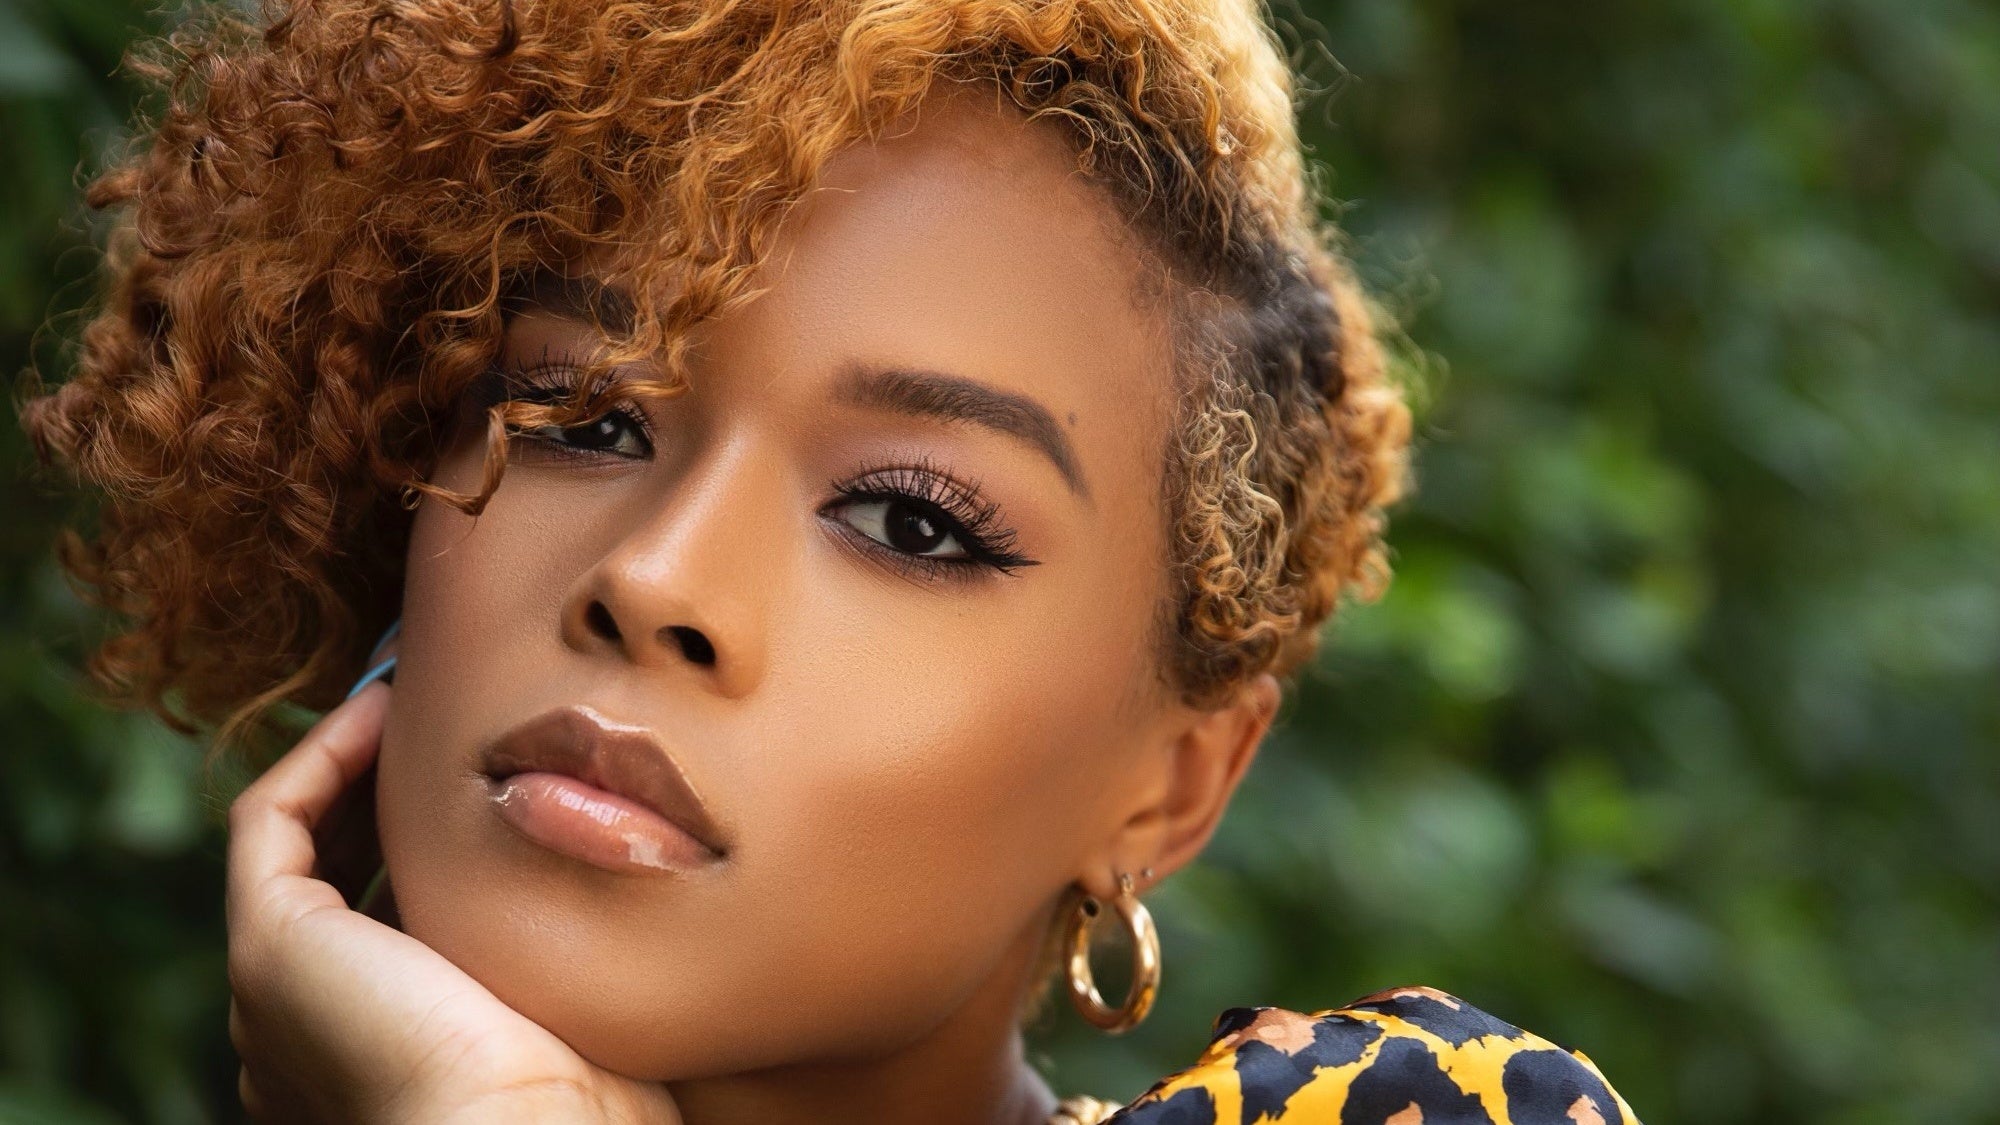 From 'Empire' To 'Envy:' Serayah McNeill On Her Growth In the Industry